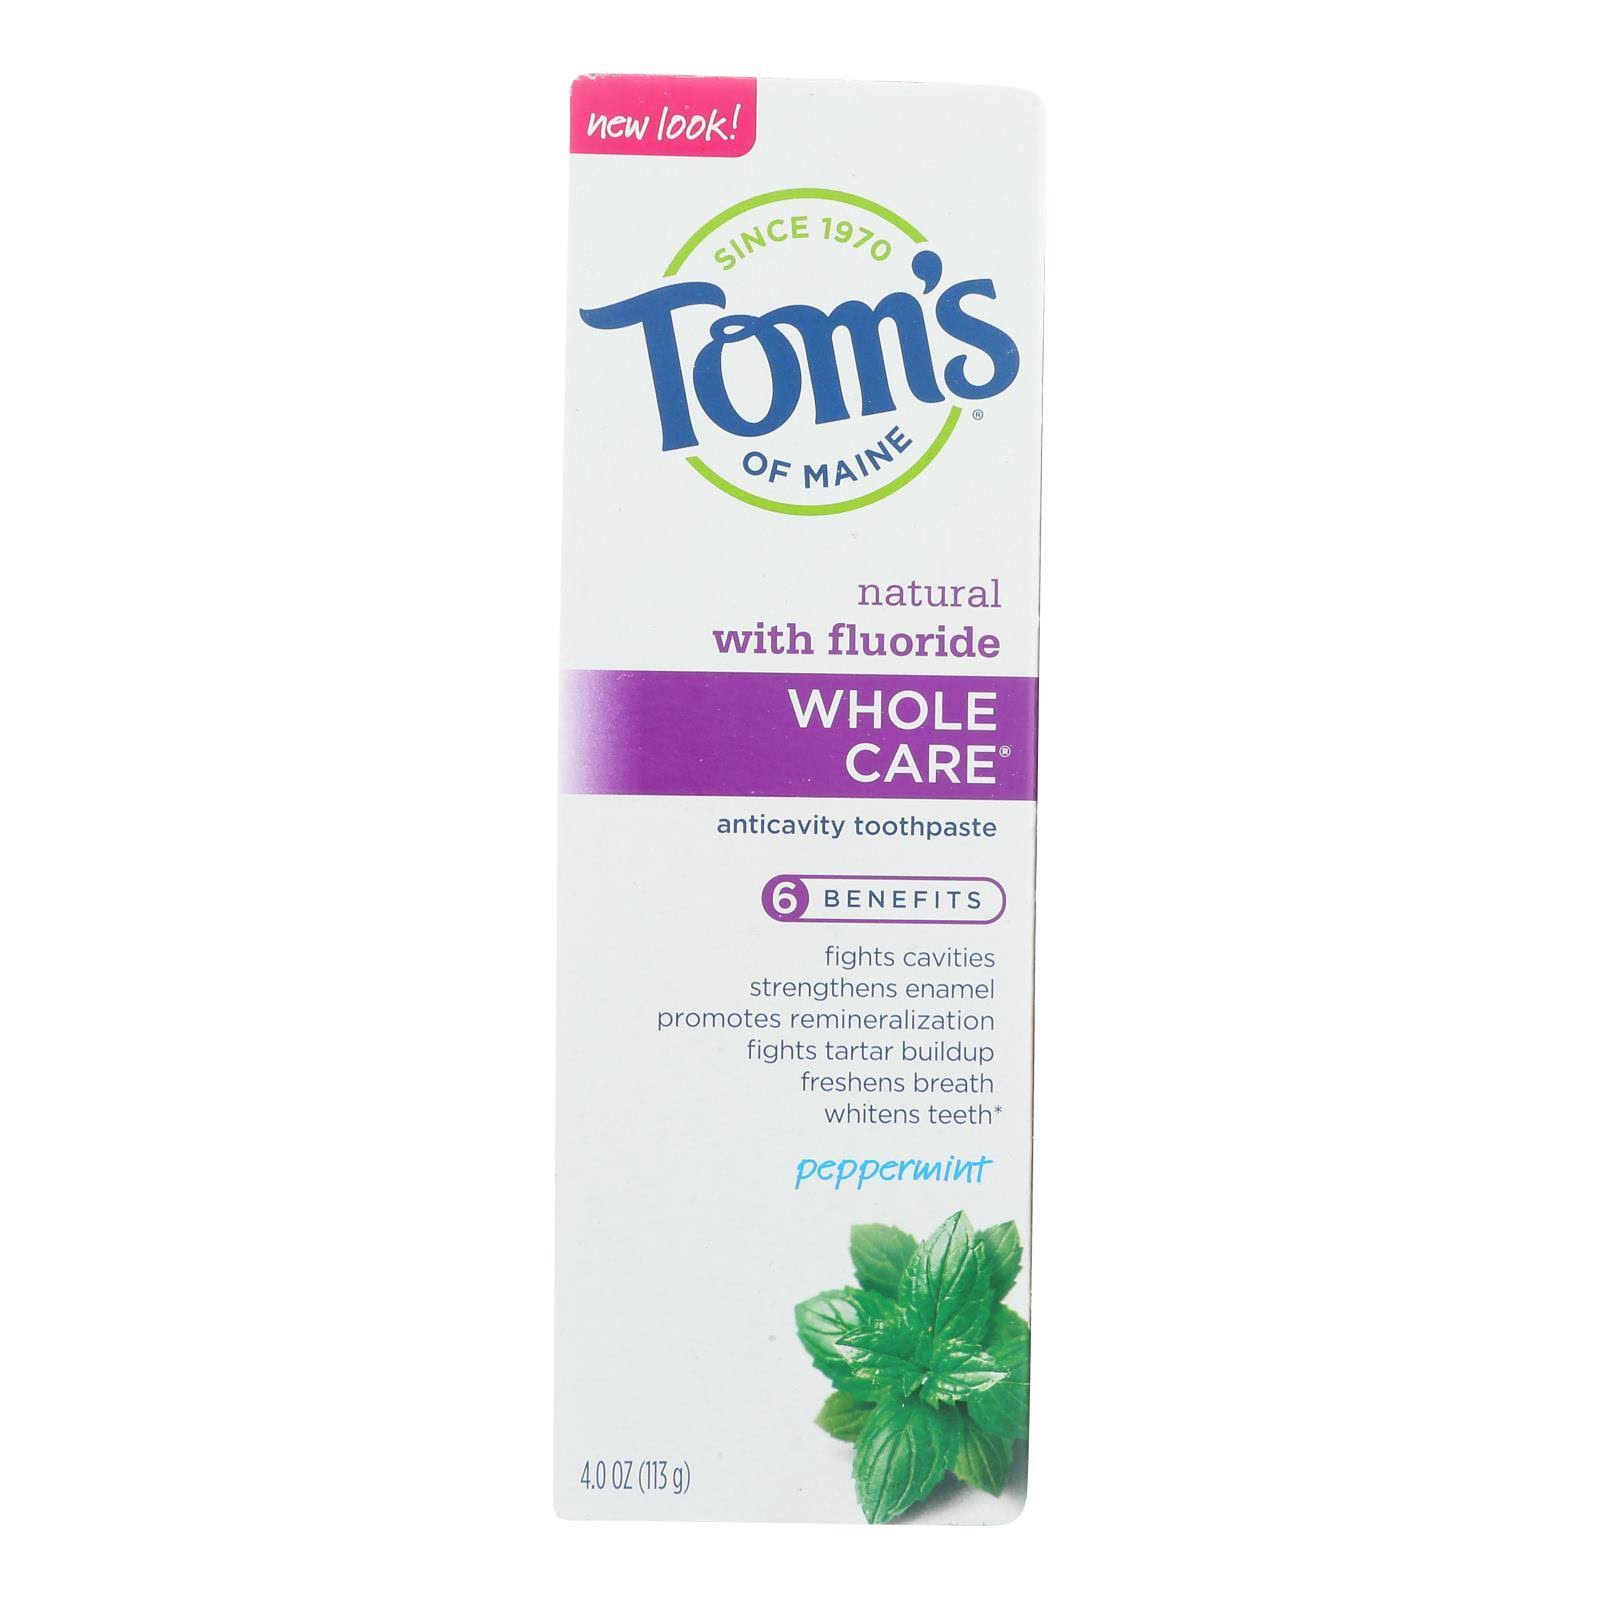 Tom's Whole Care Toothpaste, Anticavity, Peppermint - 4.0 oz